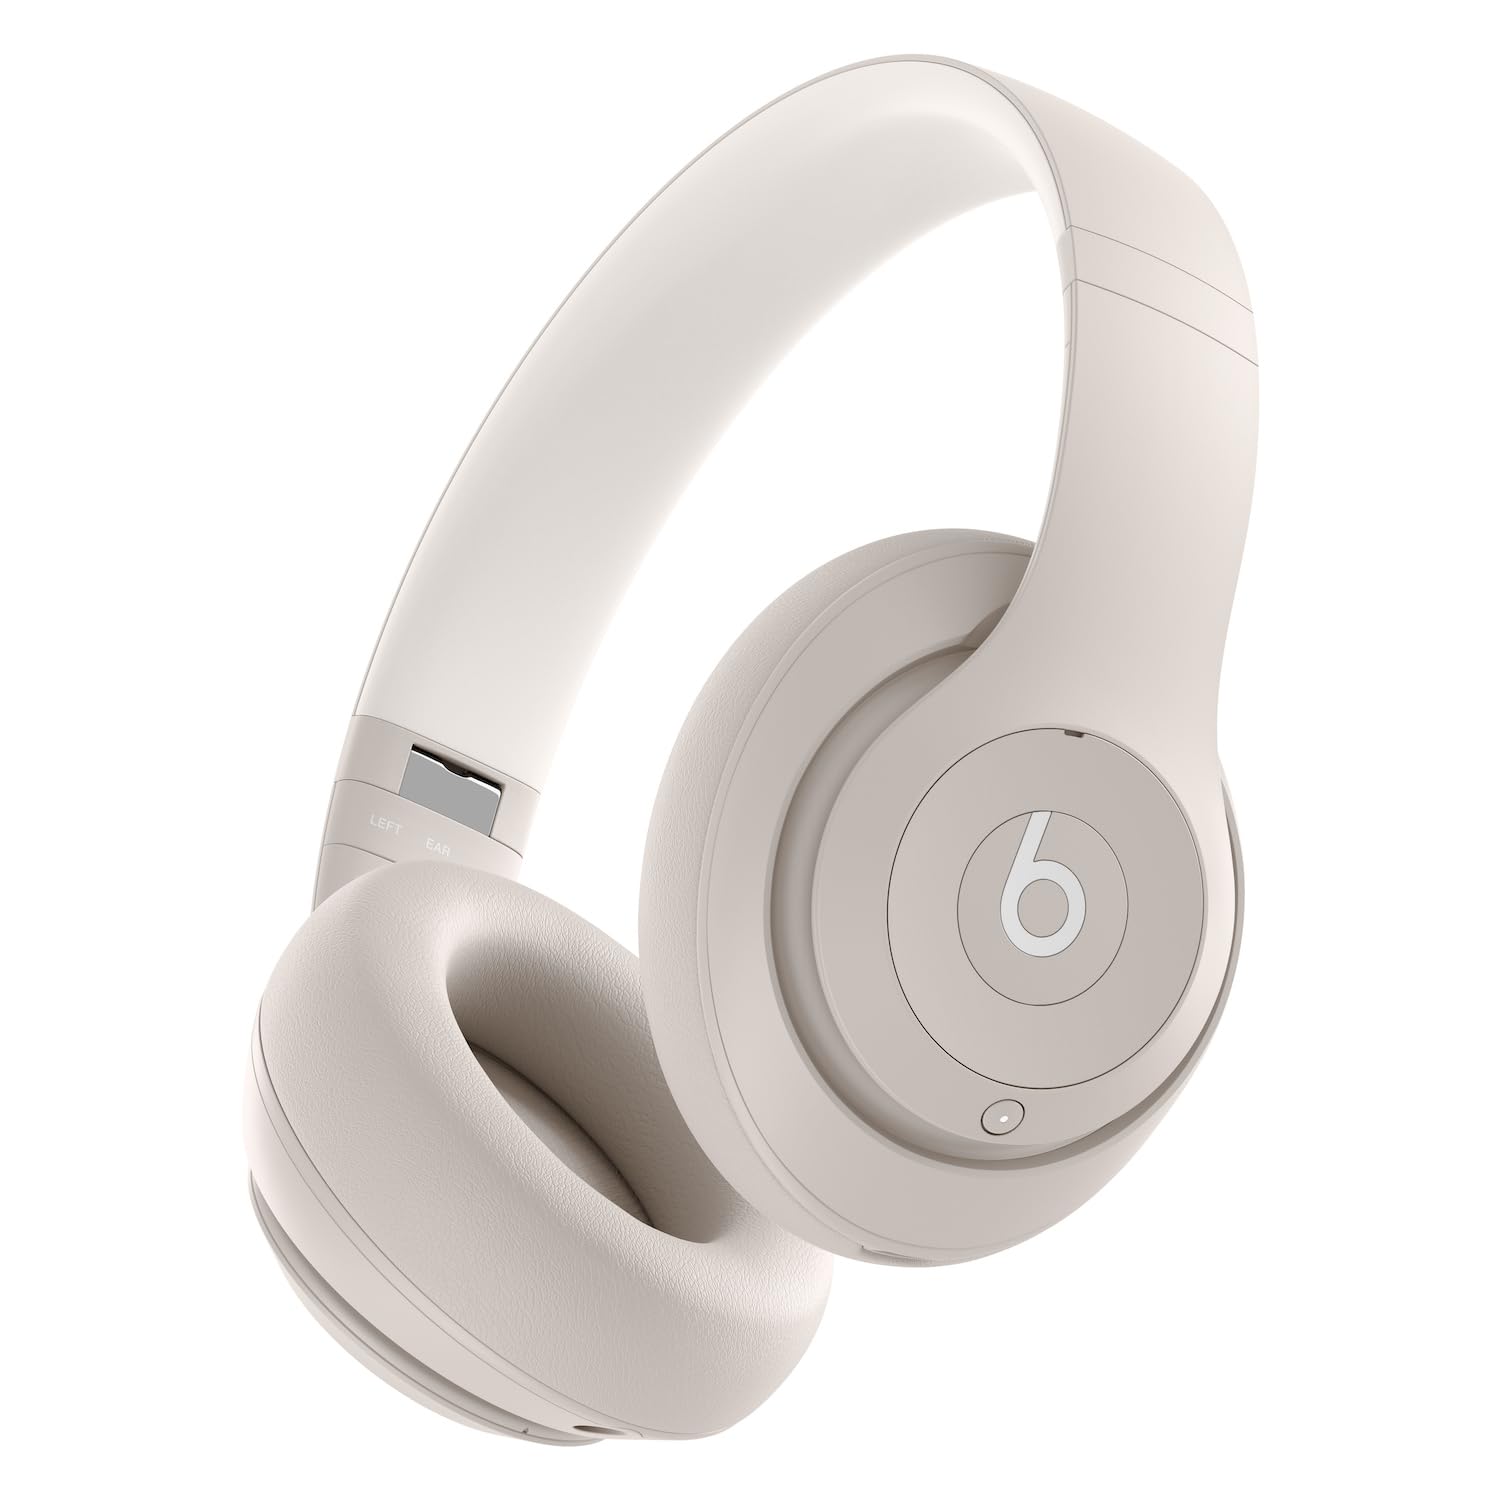 Beats Studio Pro - Wireless Bluetooth Noise Cancelling Headphones - Personalized Spatial Audio, USB-C Lossless Audio, Apple & Android Compatibility $179.99